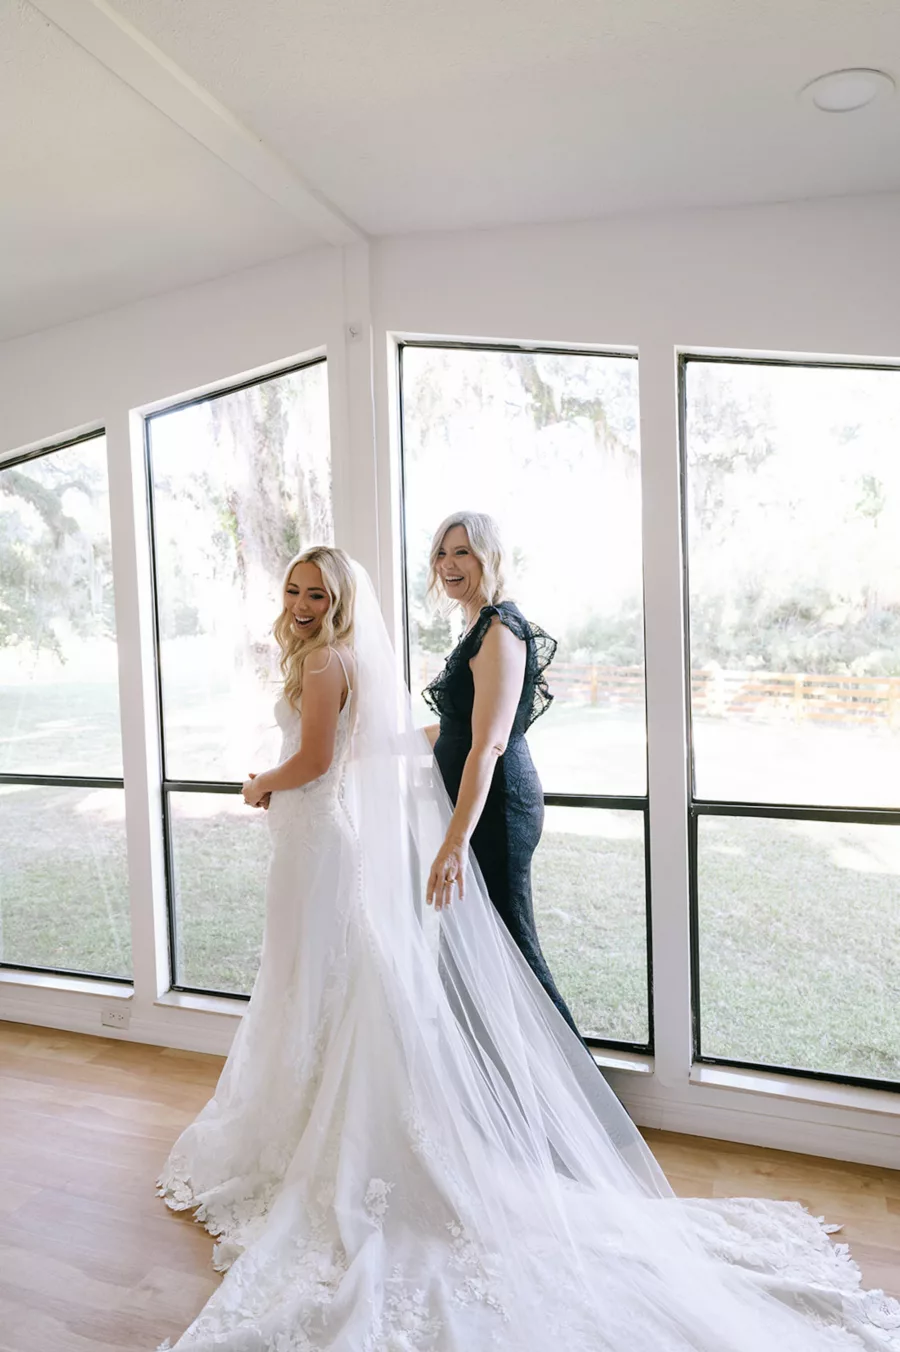 Bride Getting Ready | White Lace Sheer Bodice Fit and Flare Malindy Elene Bridal Wedding Dress Inspiration